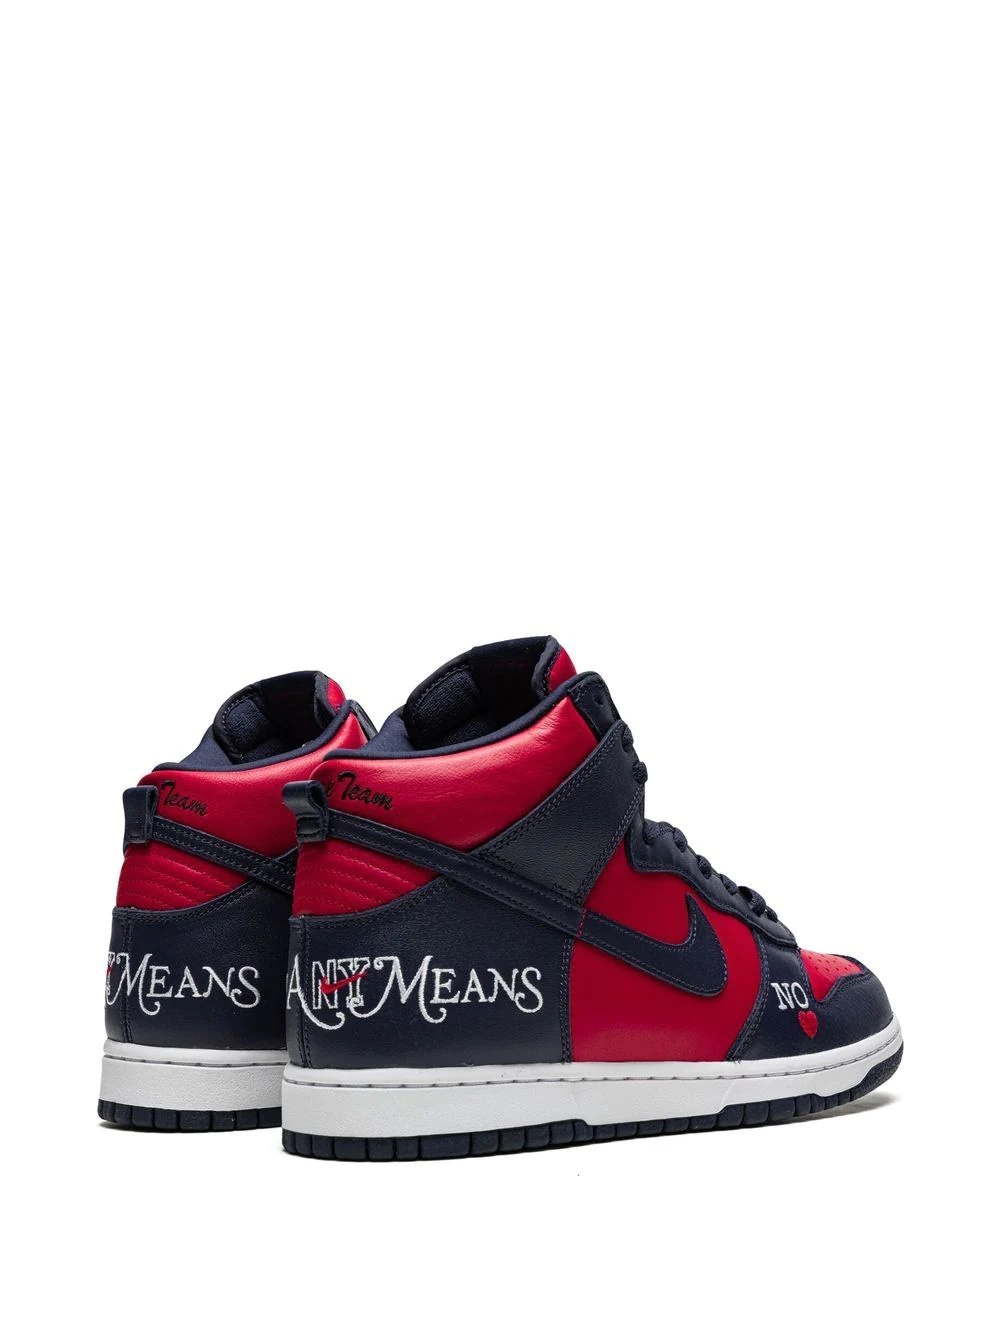 x Supreme SB Dunk High "By Any Means Navy/Red" sneakers - 3